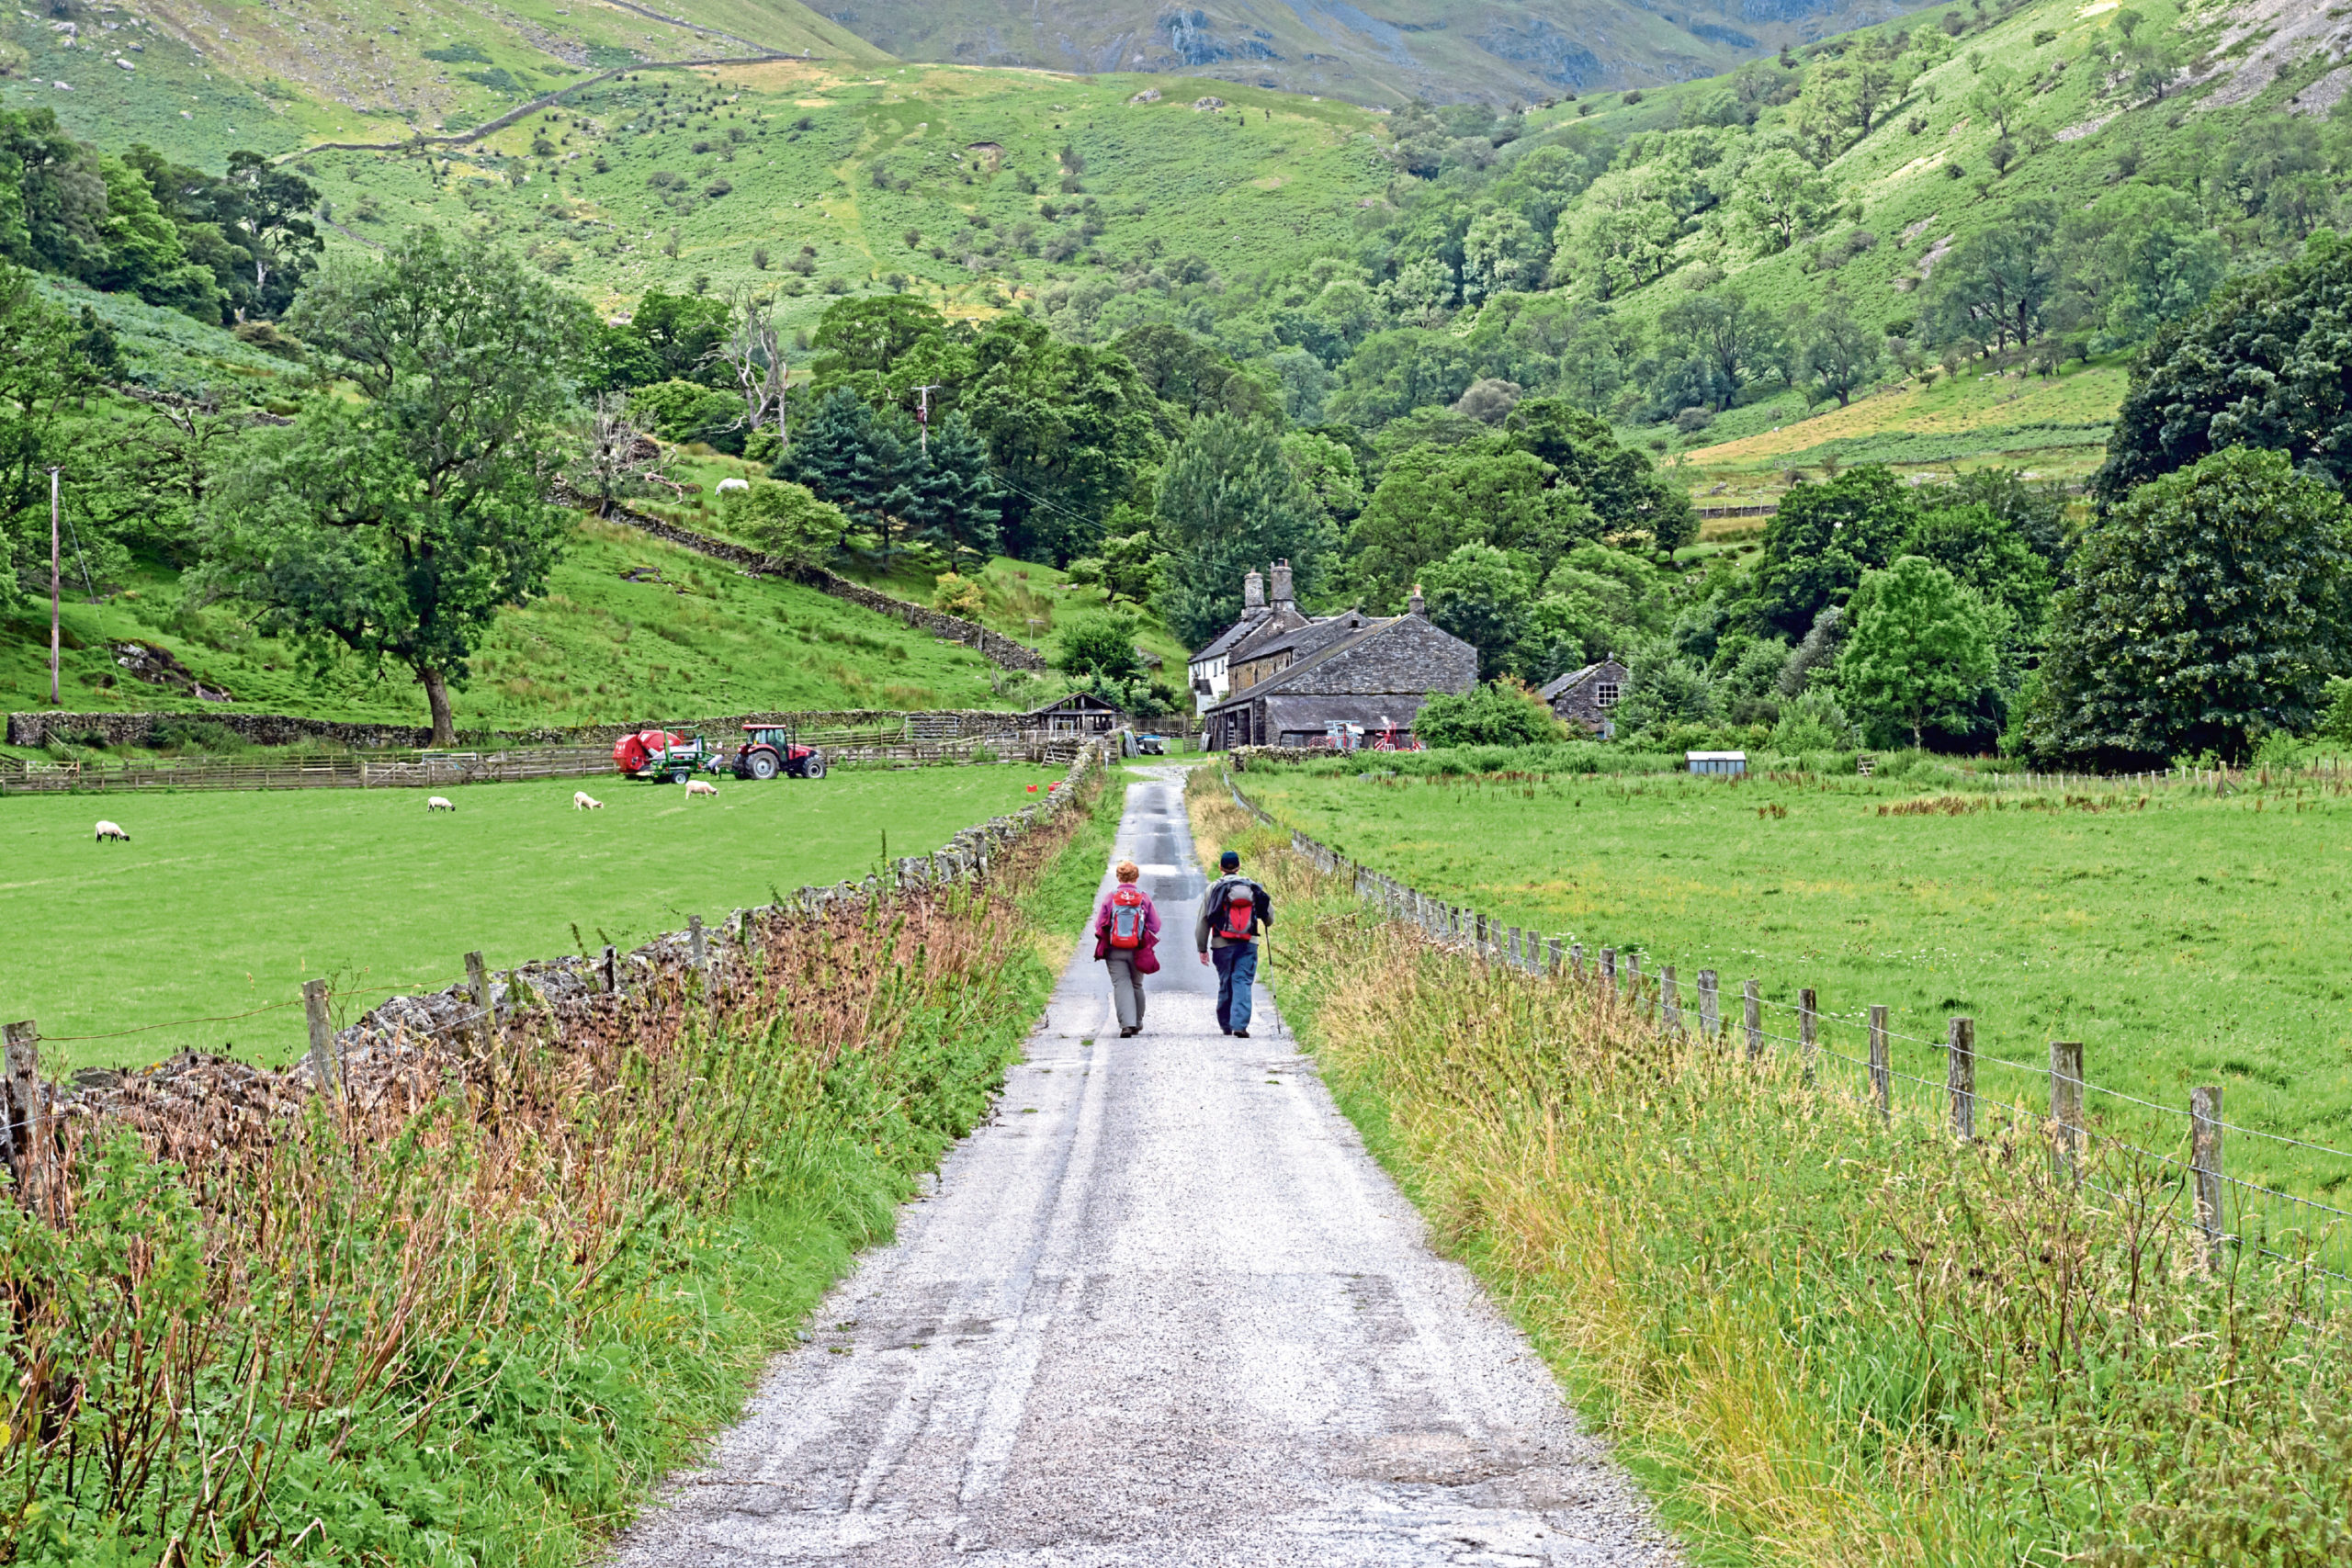 Walkers have been asked to respect the health and safety of farmers.